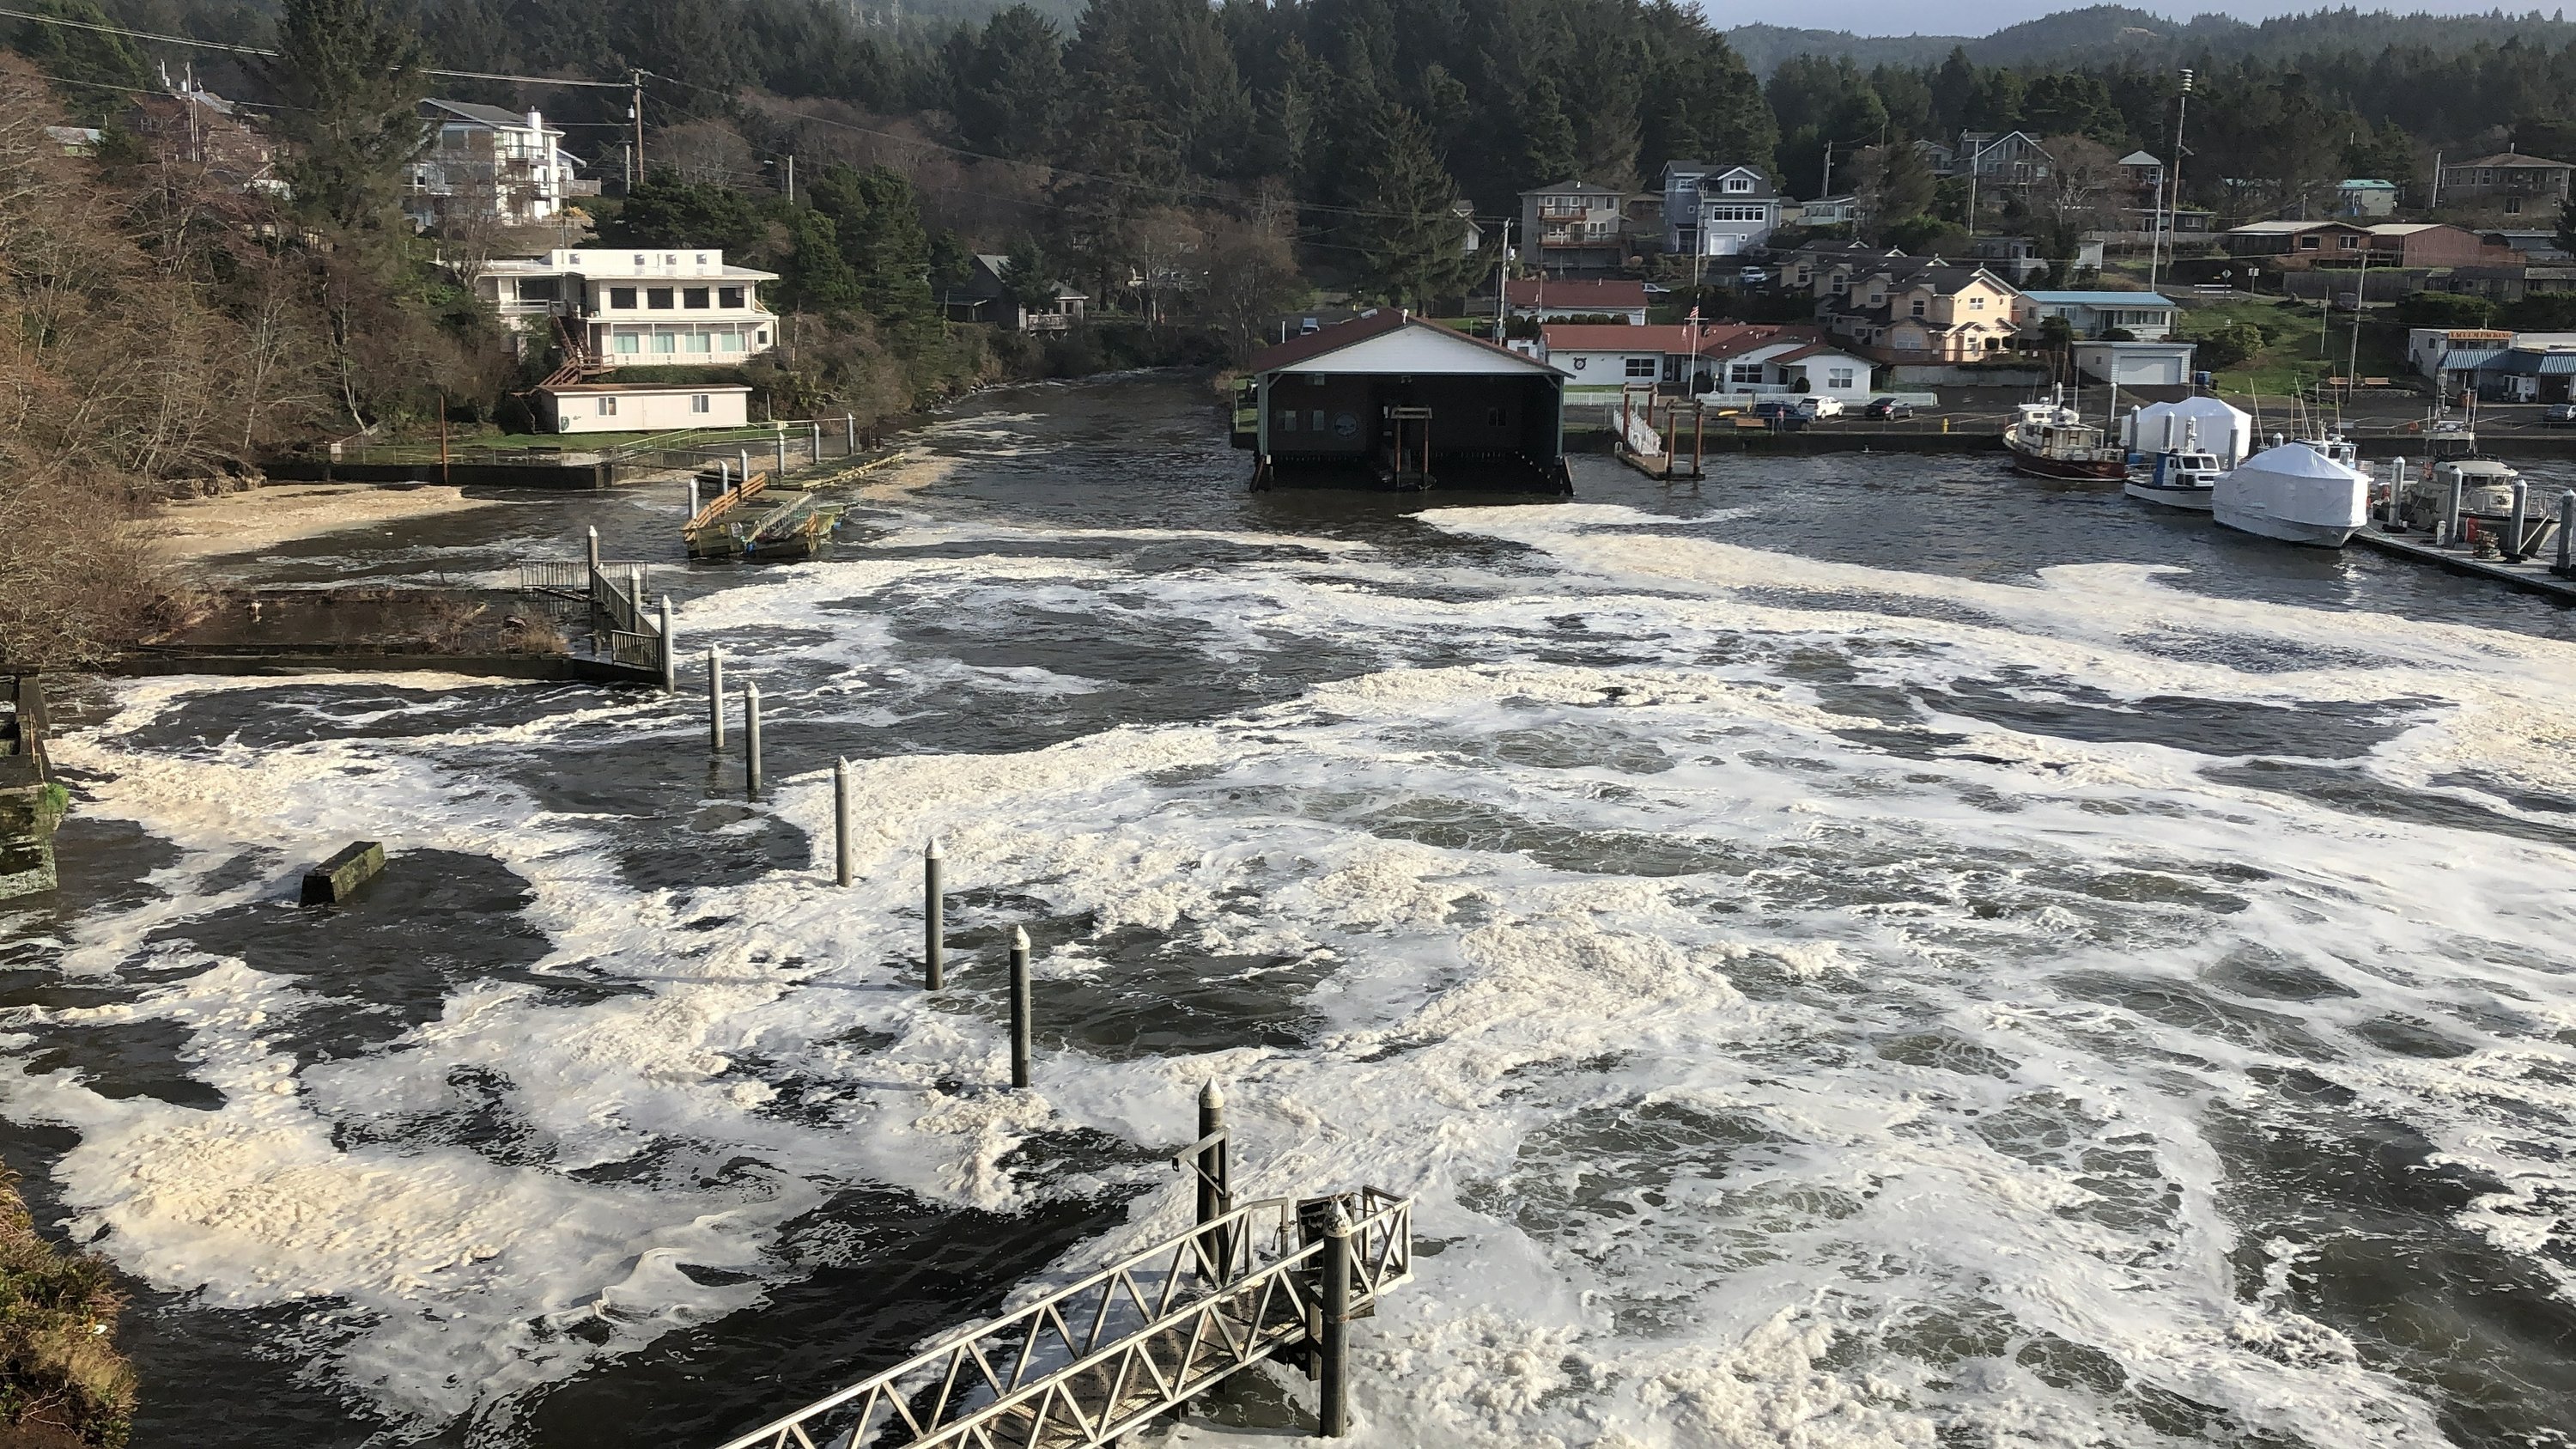 Photos of 'king tides' globally show risks of climate change AP News